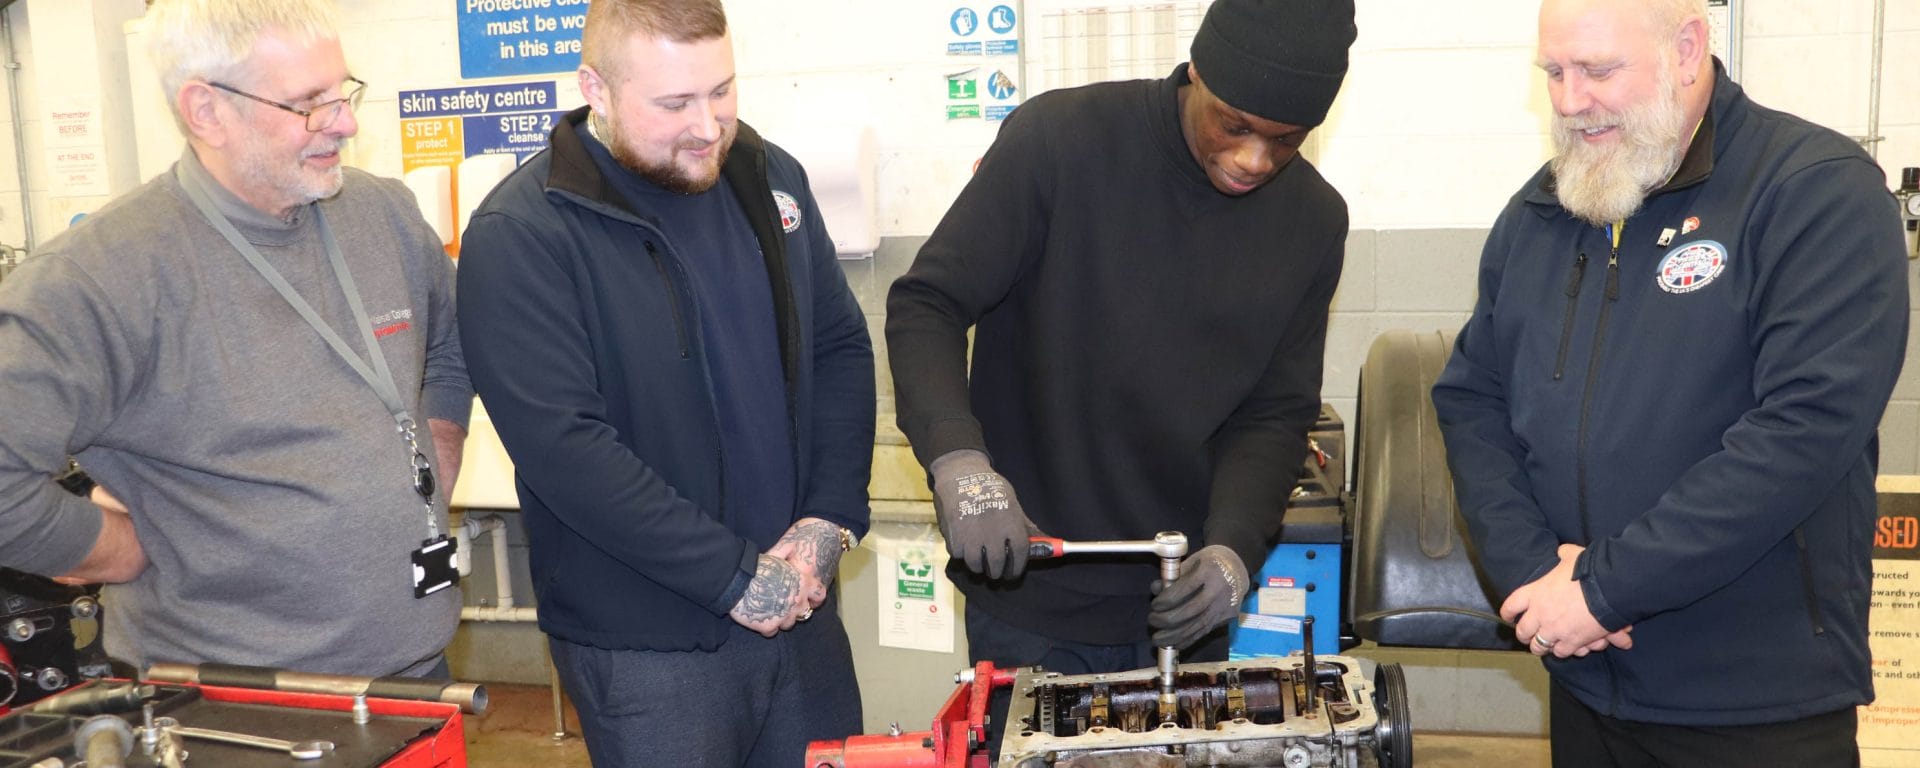 Trade Centre UK representatives and lecturer observe student working on an engine